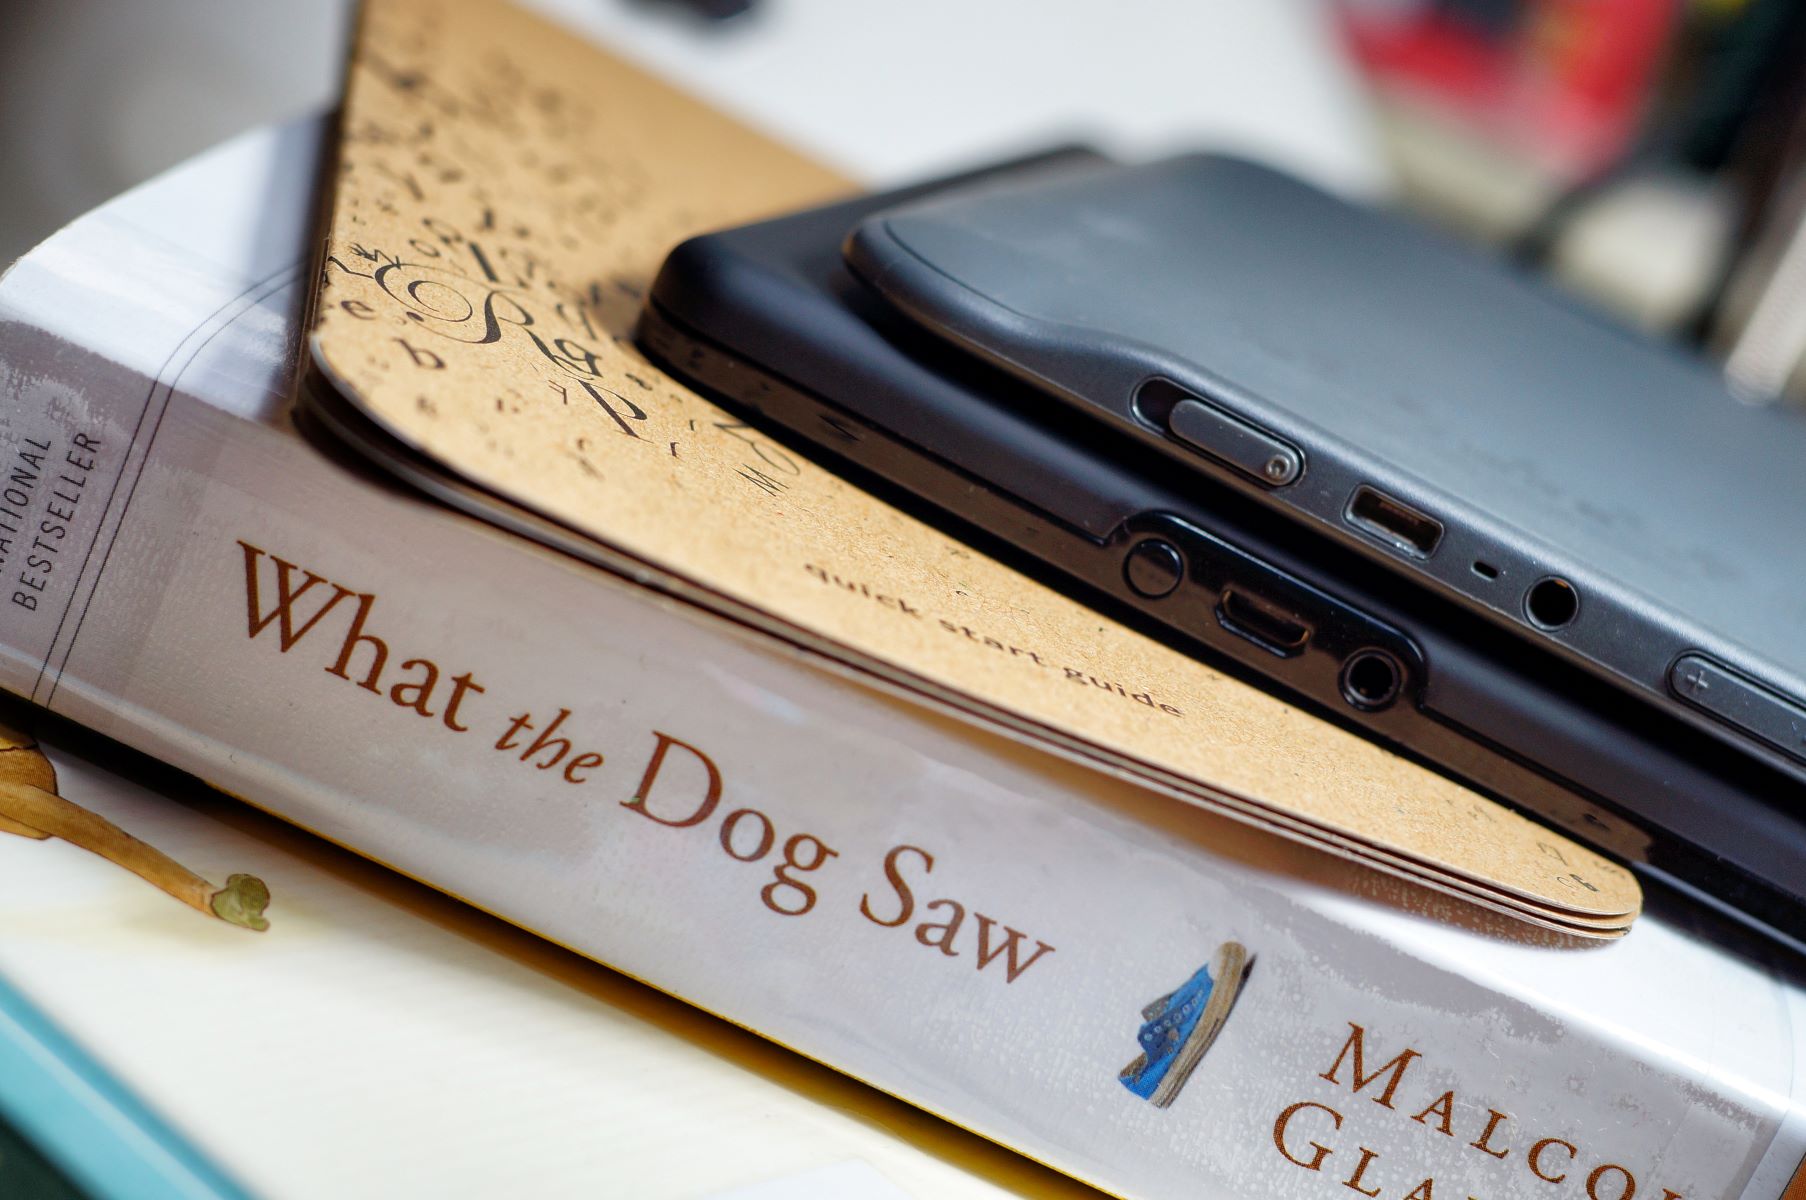 What The Dog Saw eBook Free Download